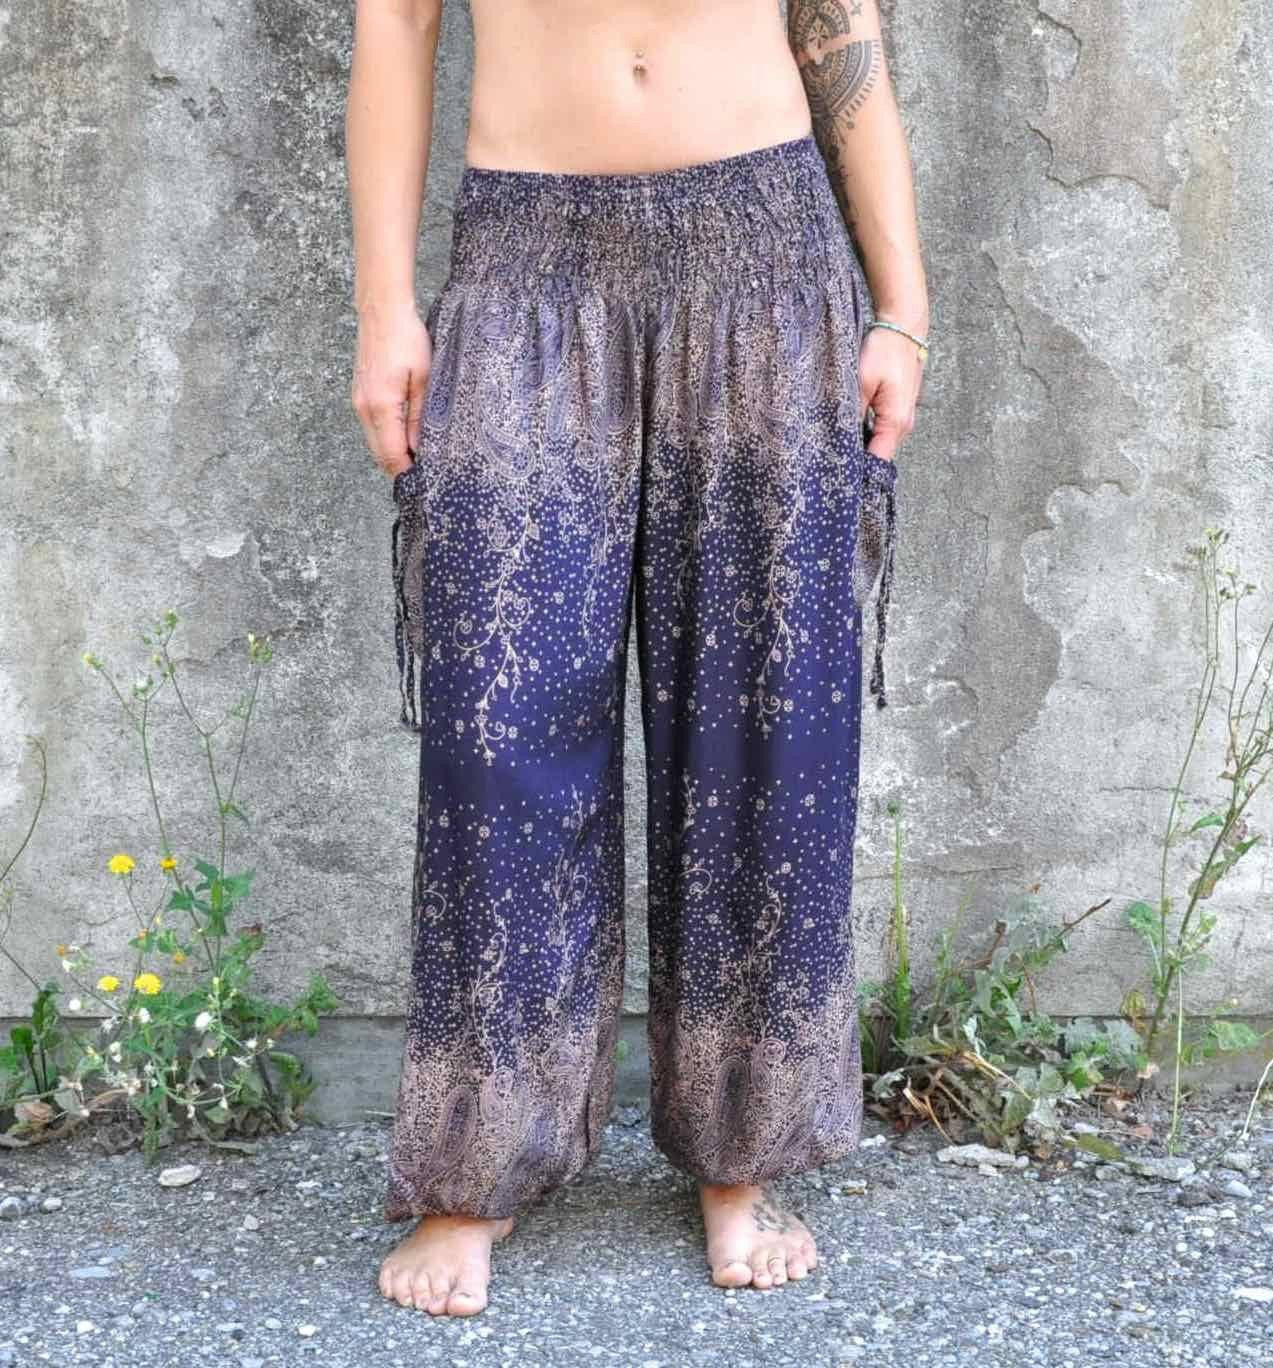 Airy harem pants with a floral pattern in blue